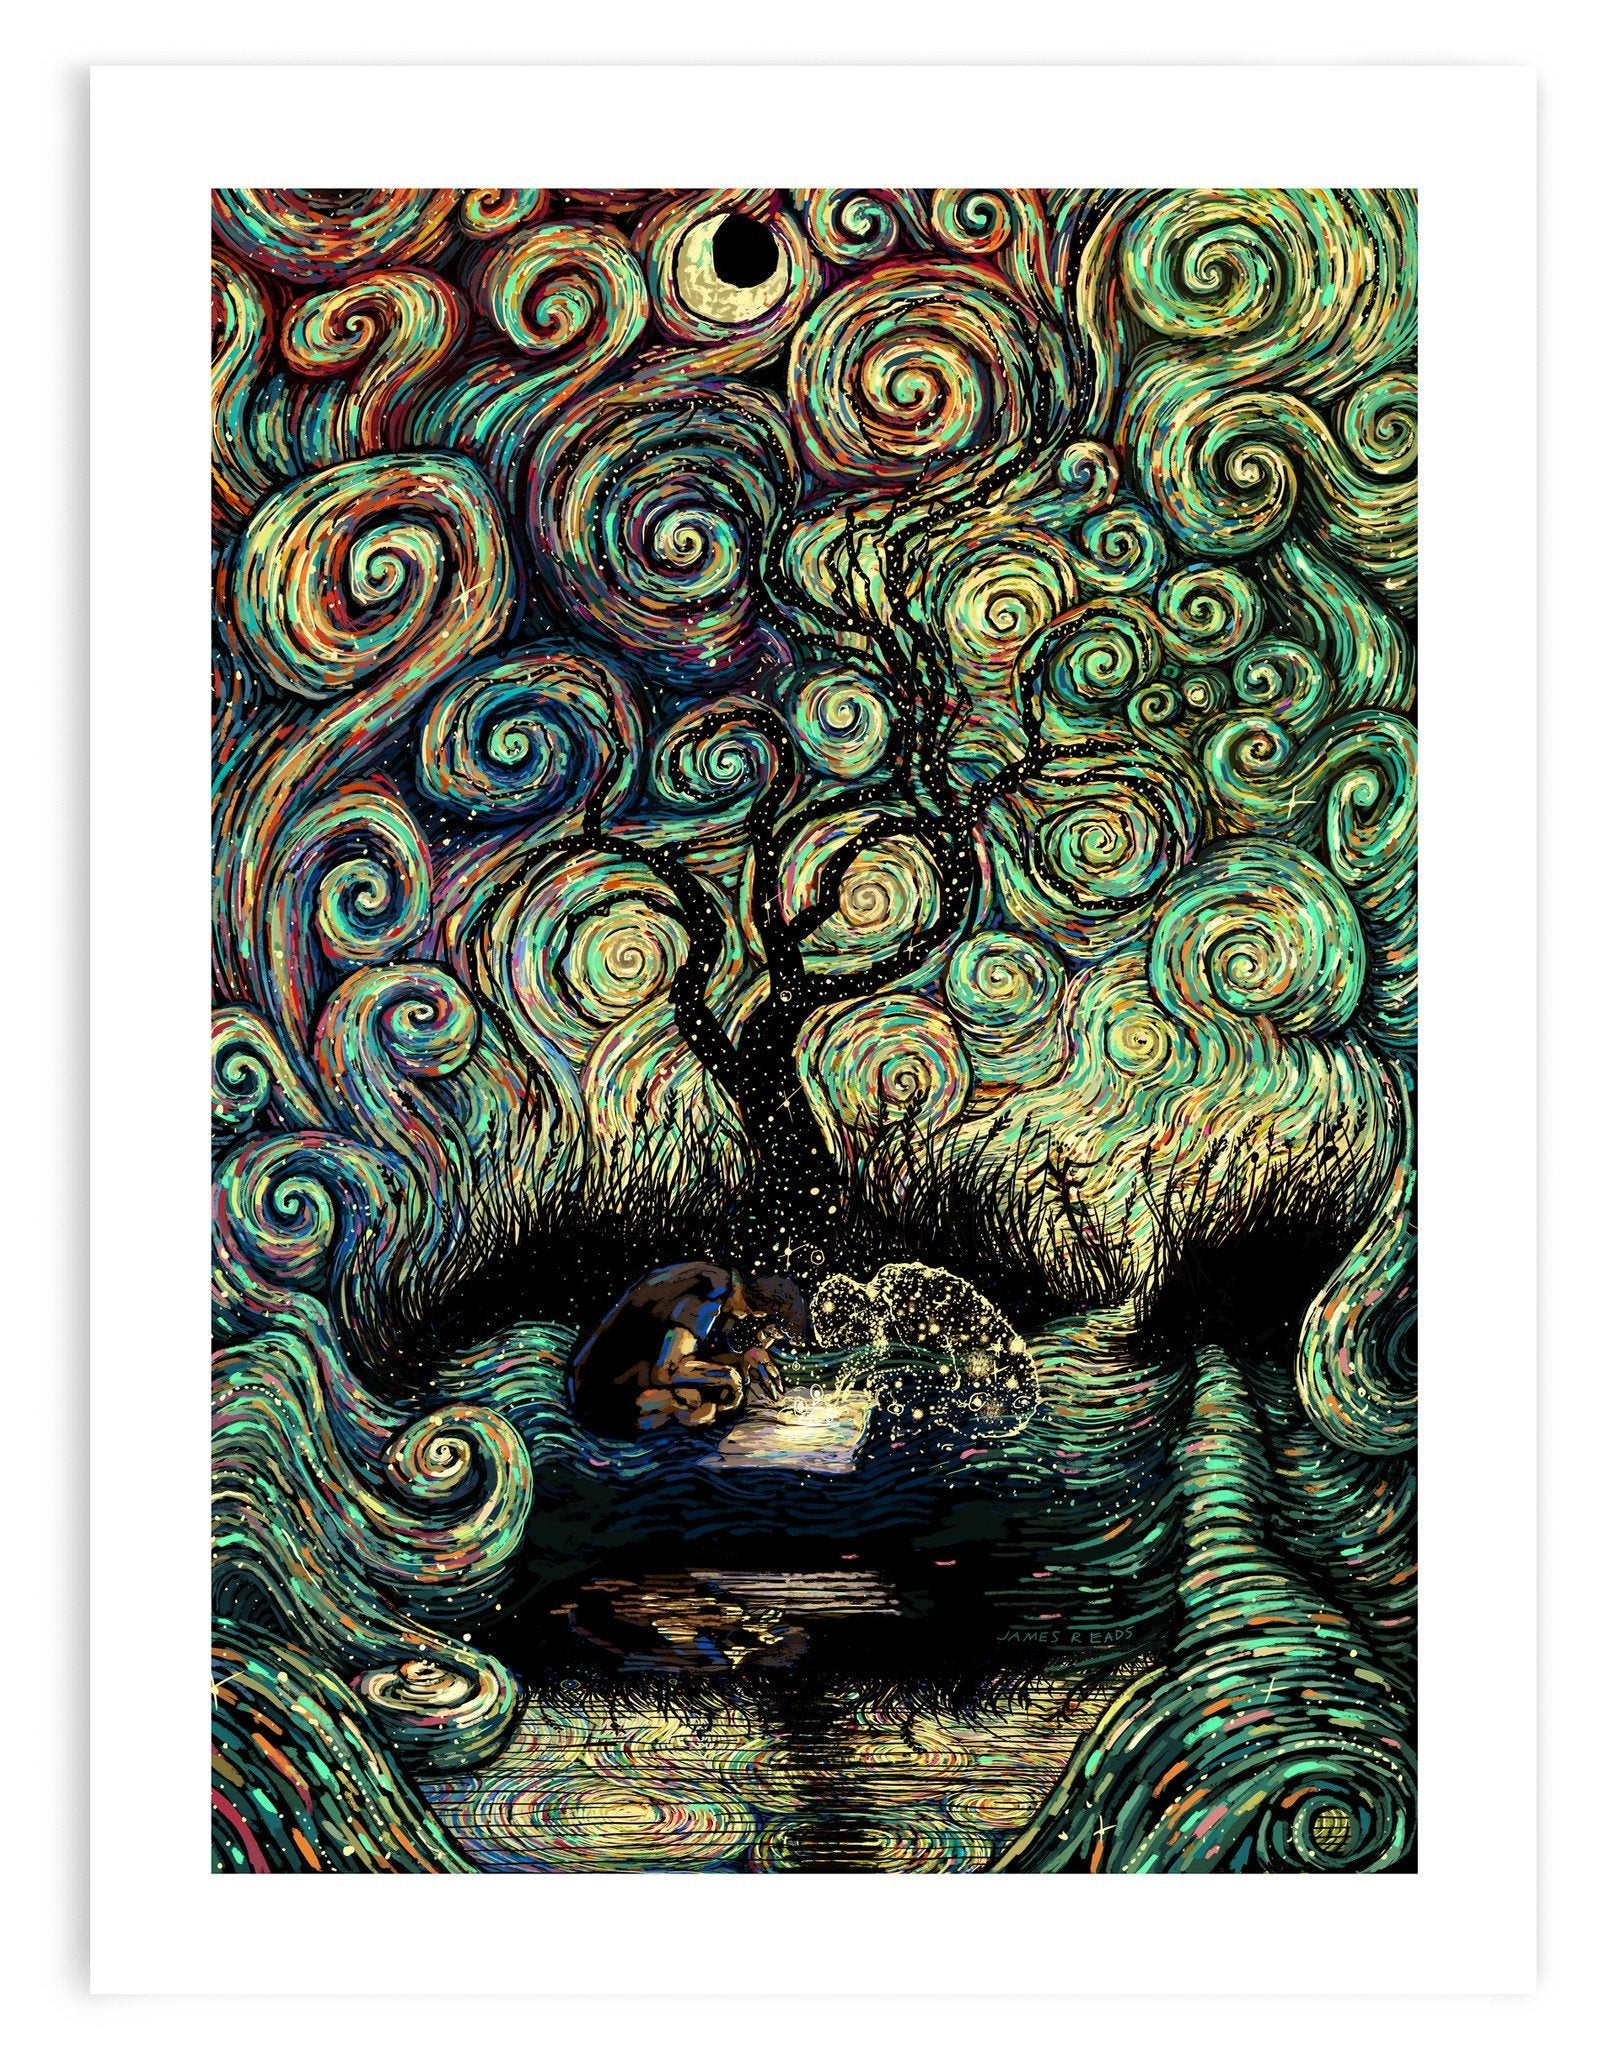 Wherever You Go, There You Are (Limited Edition of 50) Print James R. Eads